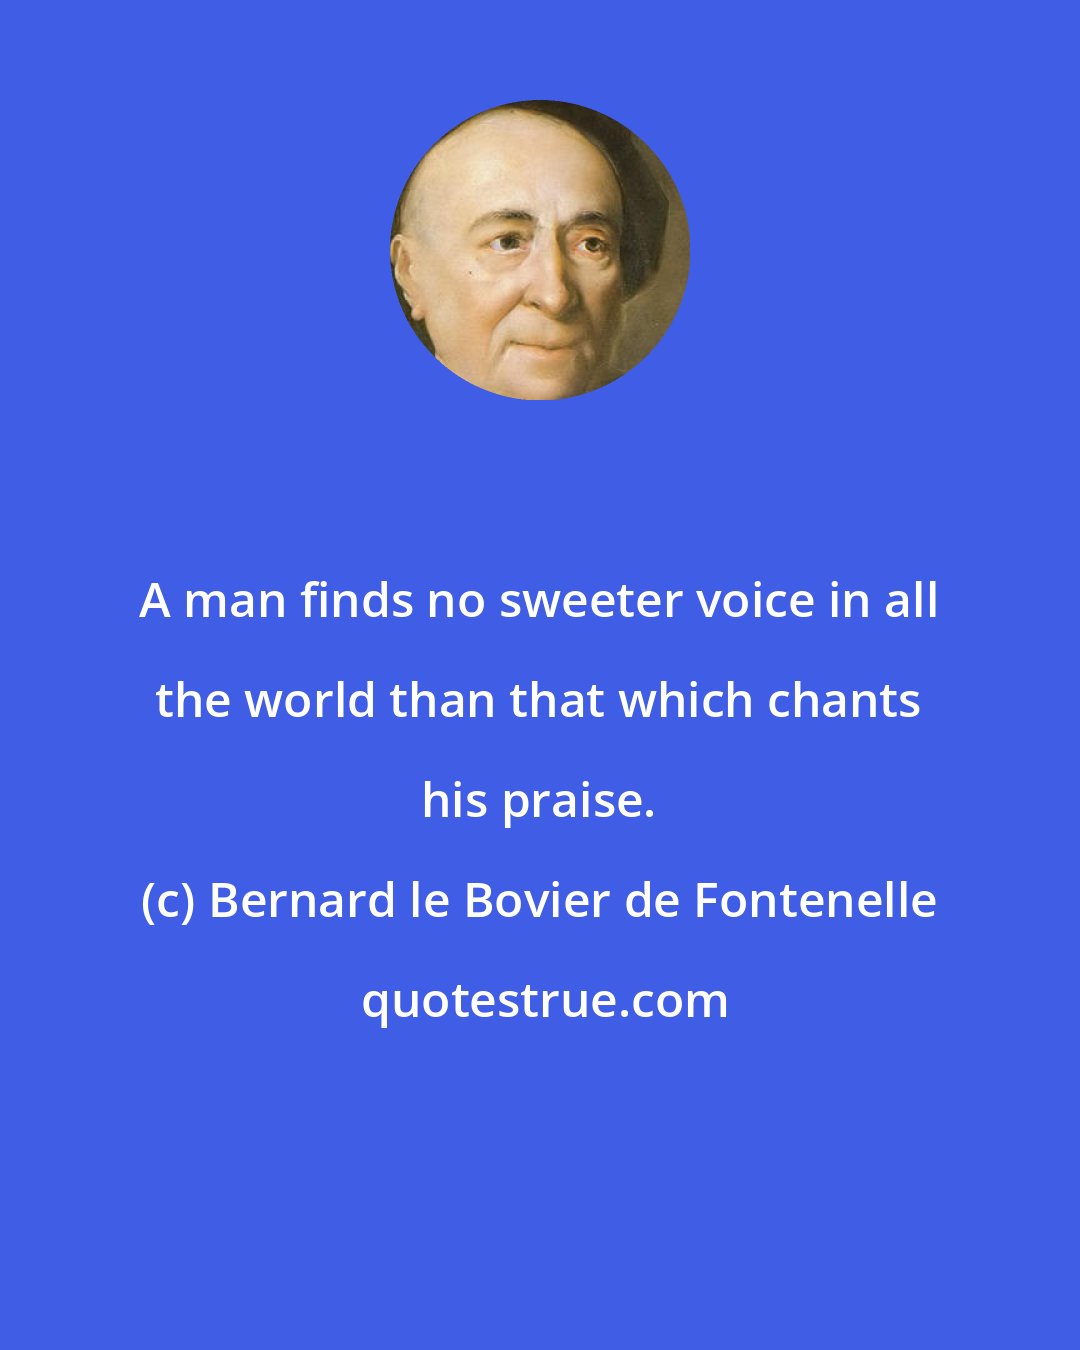 Bernard le Bovier de Fontenelle: A man finds no sweeter voice in all the world than that which chants his praise.